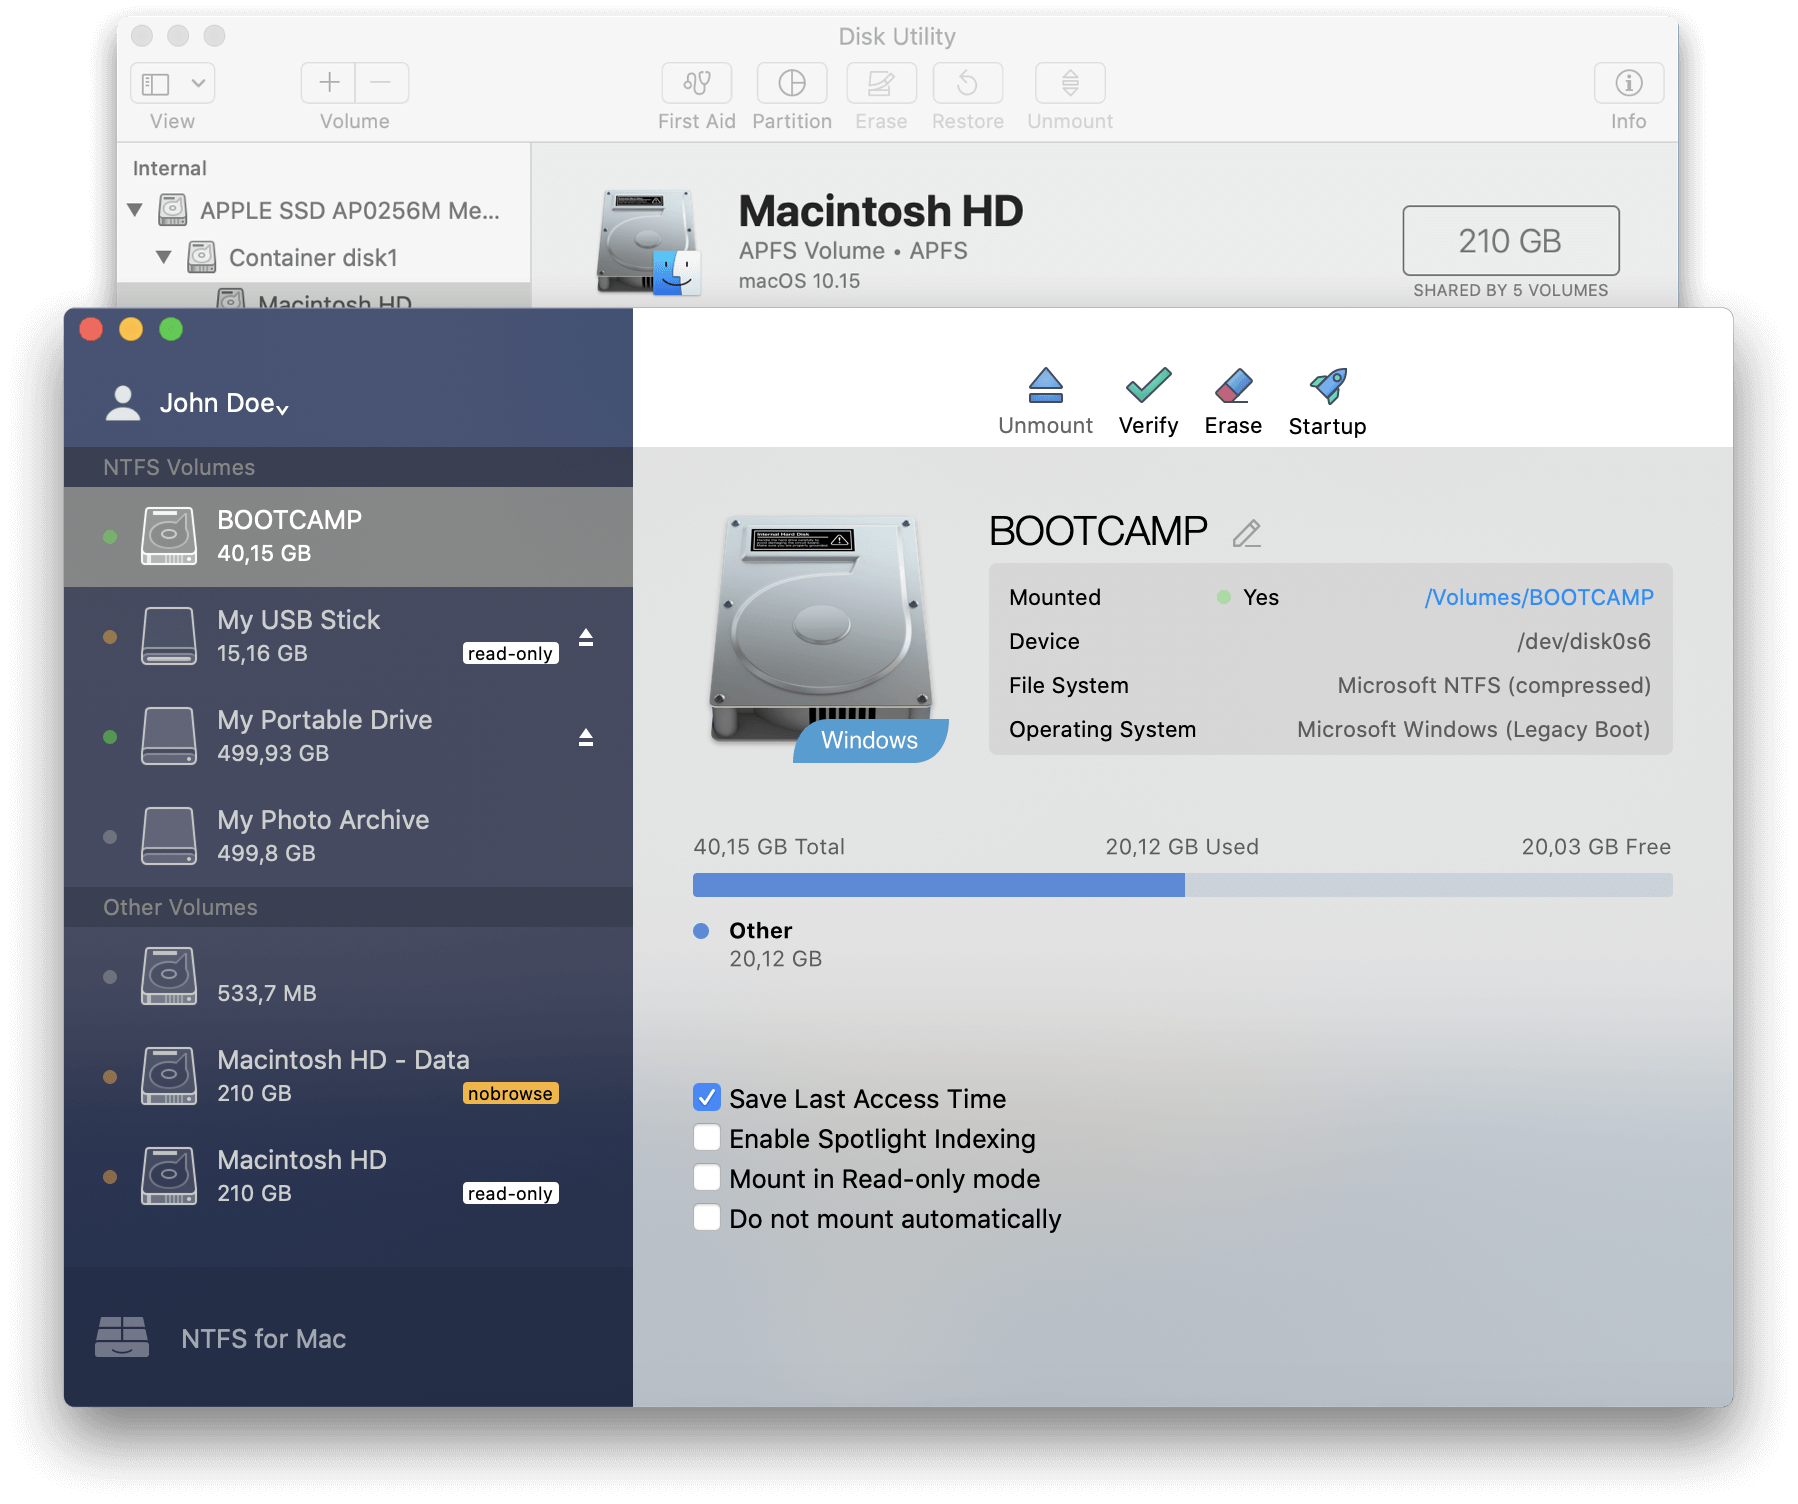 Microsoft NTFS for Mac firmy Paragon Software. Use Apple’s Disk Utility with volume operations and mount options. Zrzut ekranu.